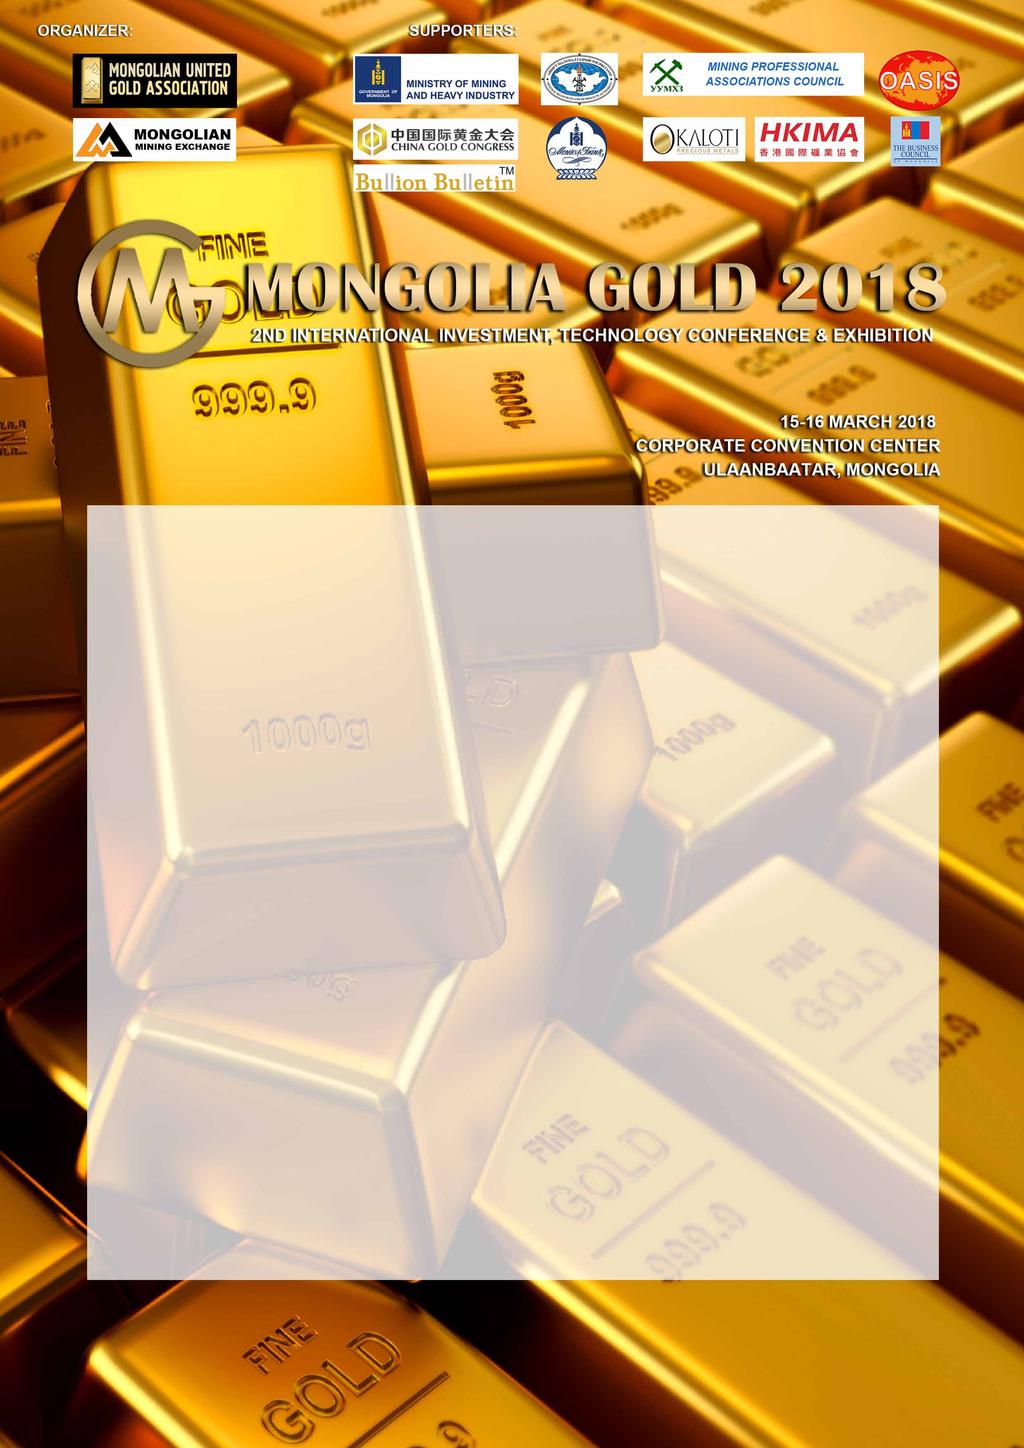 The purpose: The Mongolia gold conference committed to directing globally investors attention towards Mongolian gold industry, opening financial opportunities, relocating advanced technology and